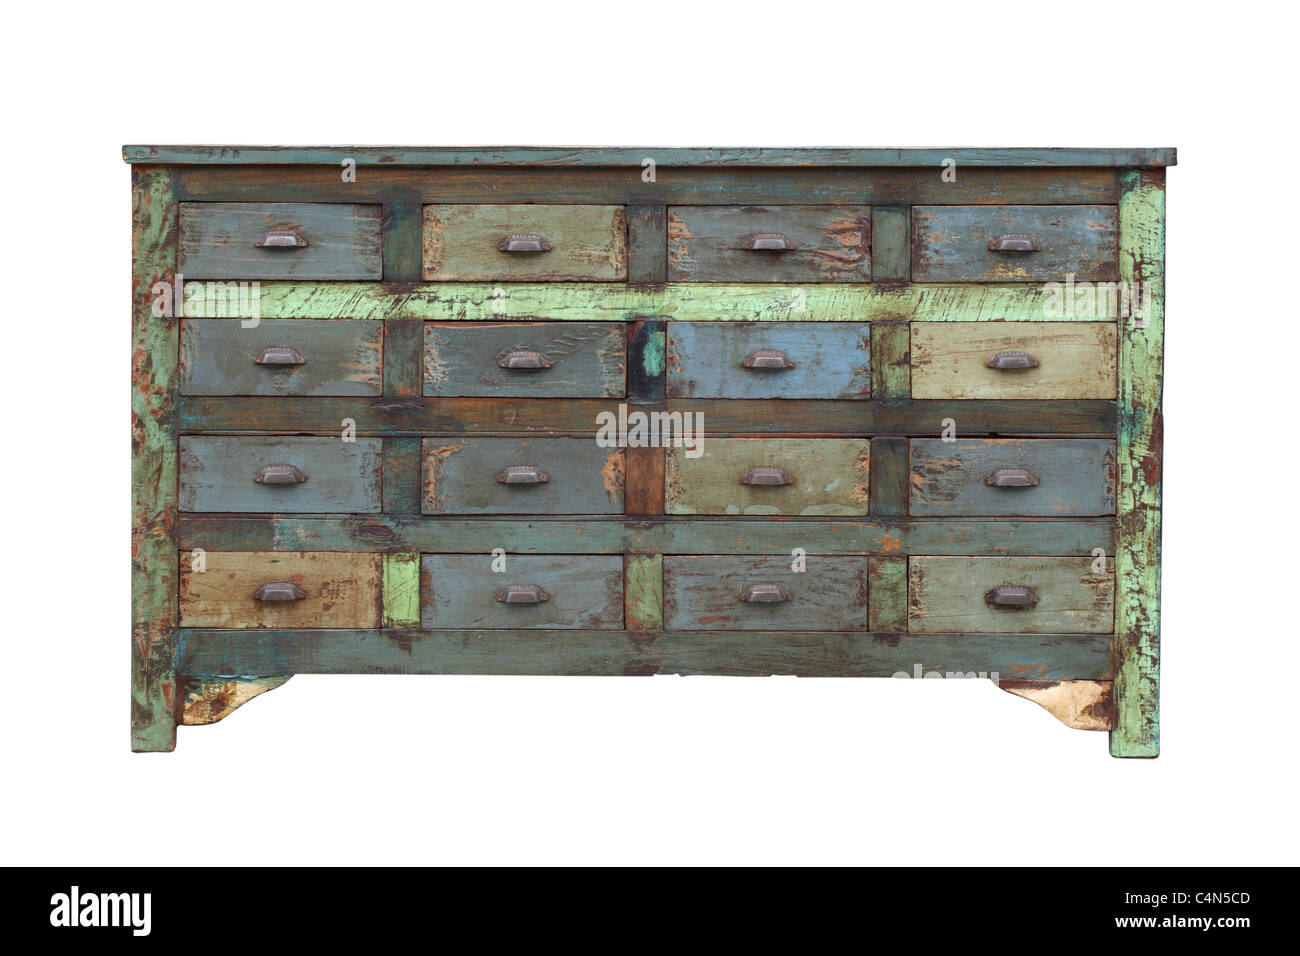 Old Over Used Dresser Stock Photo 37344621 Alamy